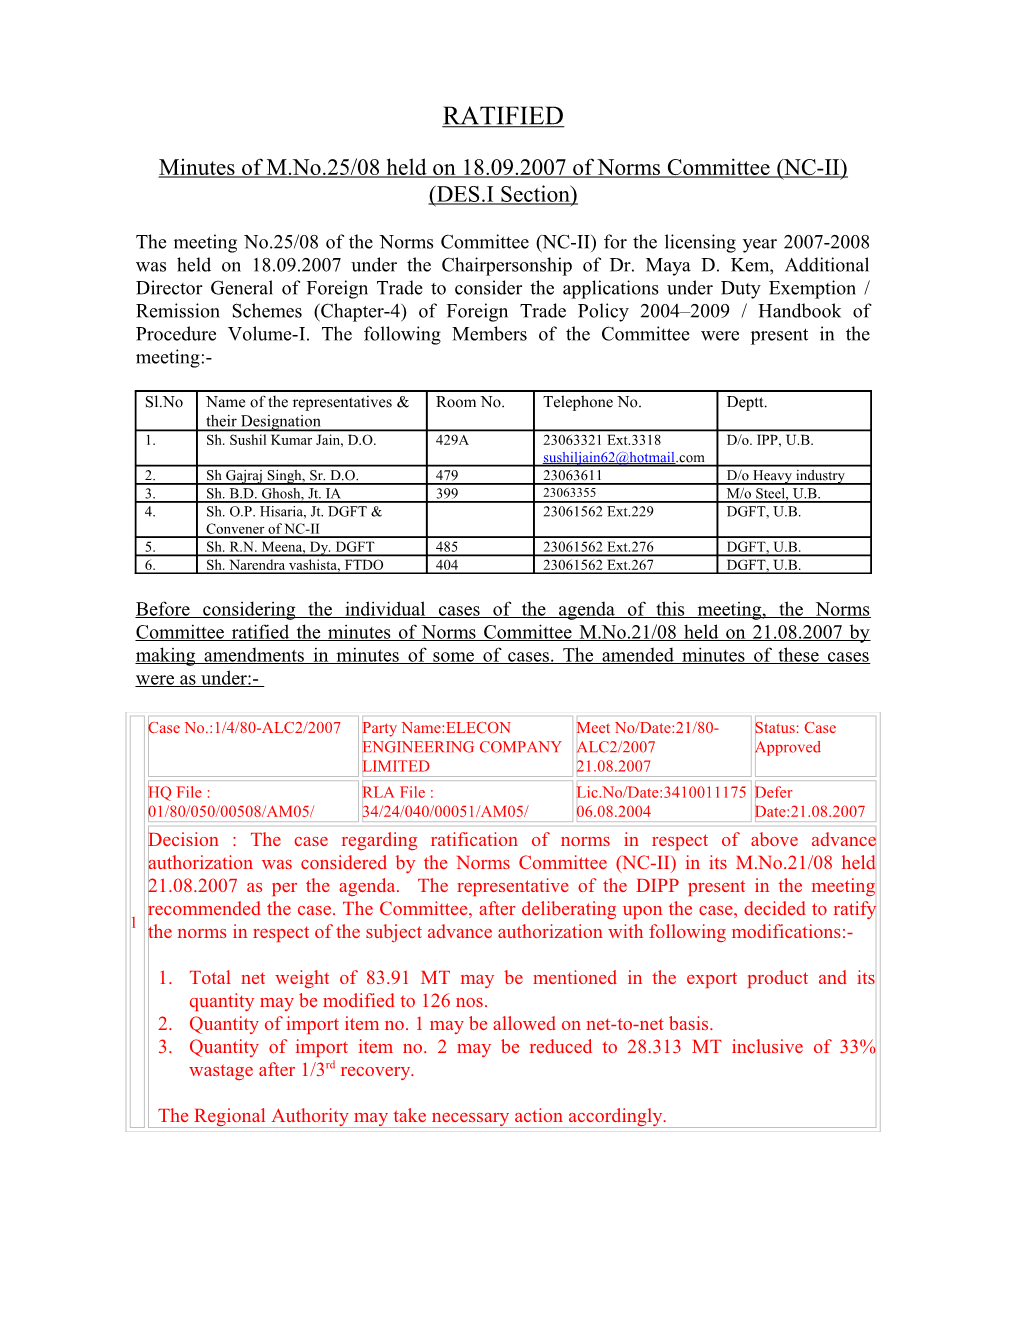 Minutes of M.No.25/08 Held on 18.09.2007 of Norms Committee (NC-II)